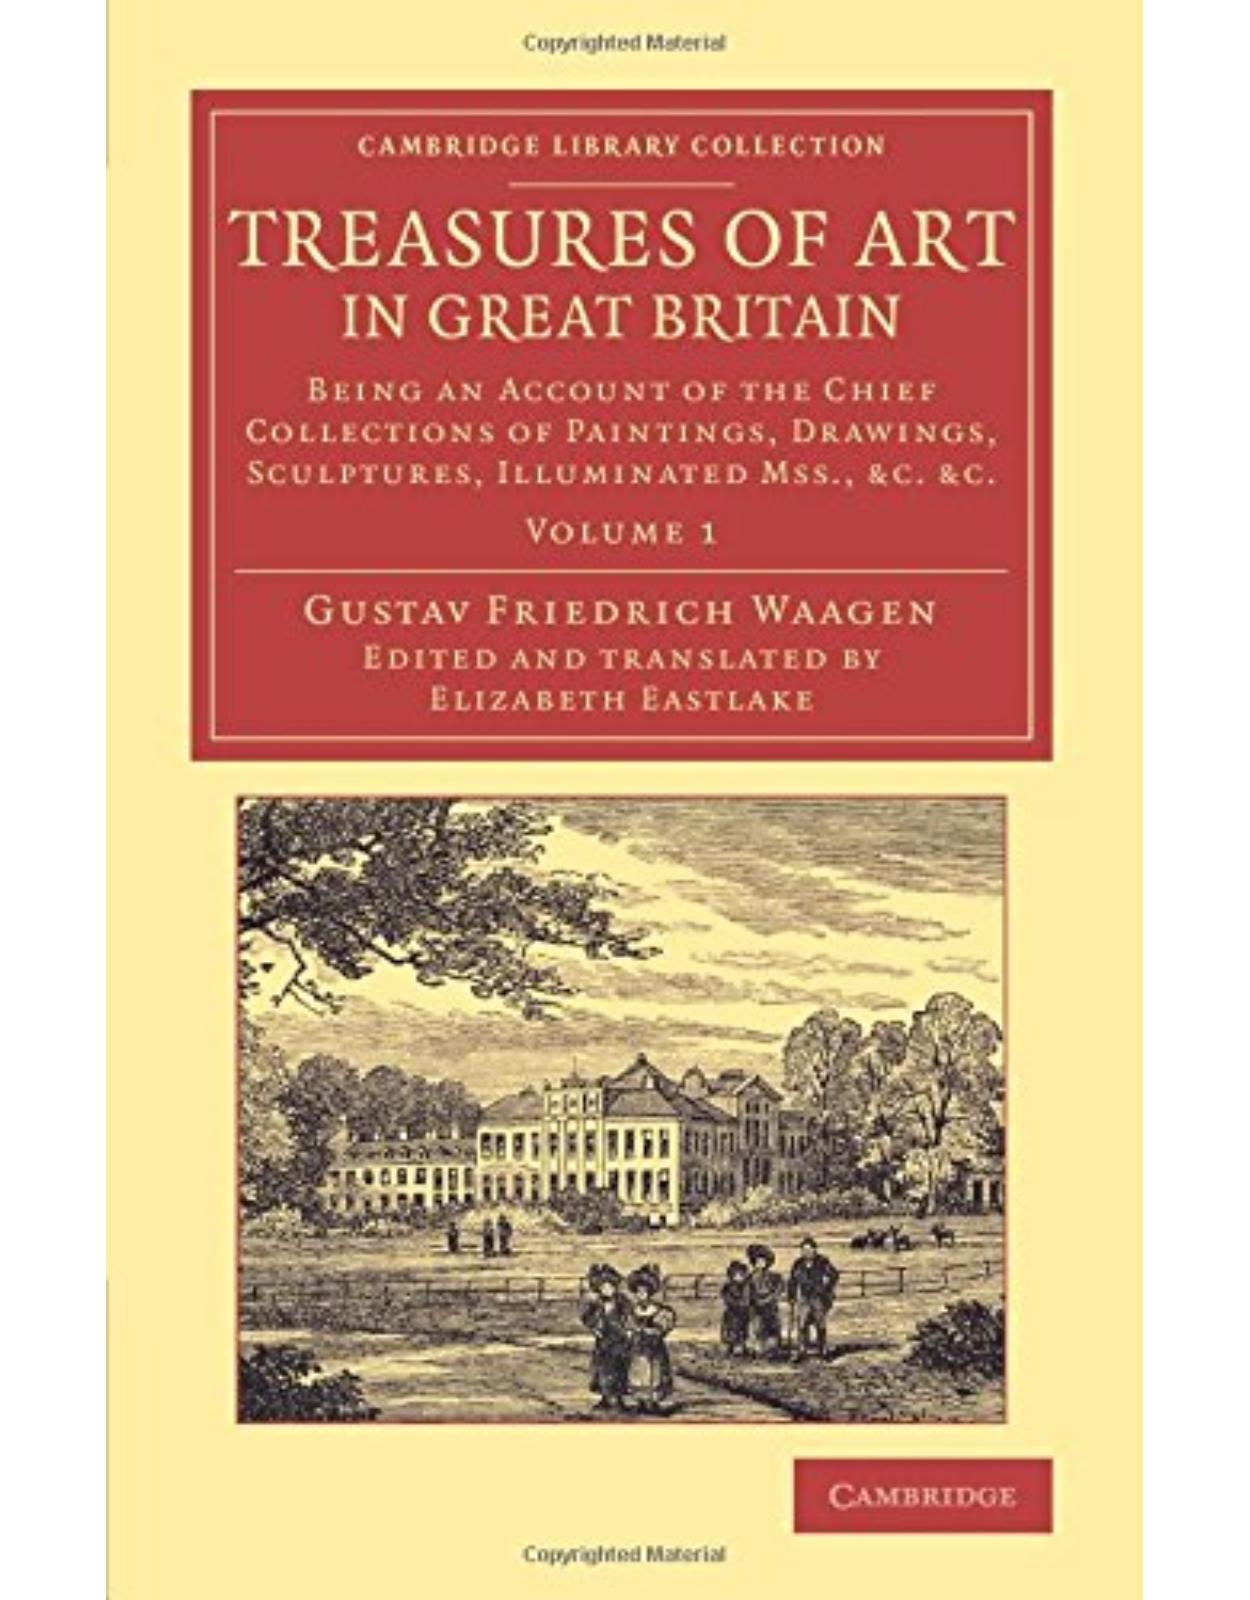 Treasures of Art in Great Britain: Being an Account of the Chief Collections of Paintings, Drawings, Sculptures, Illuminated Mss. (Volume 1)